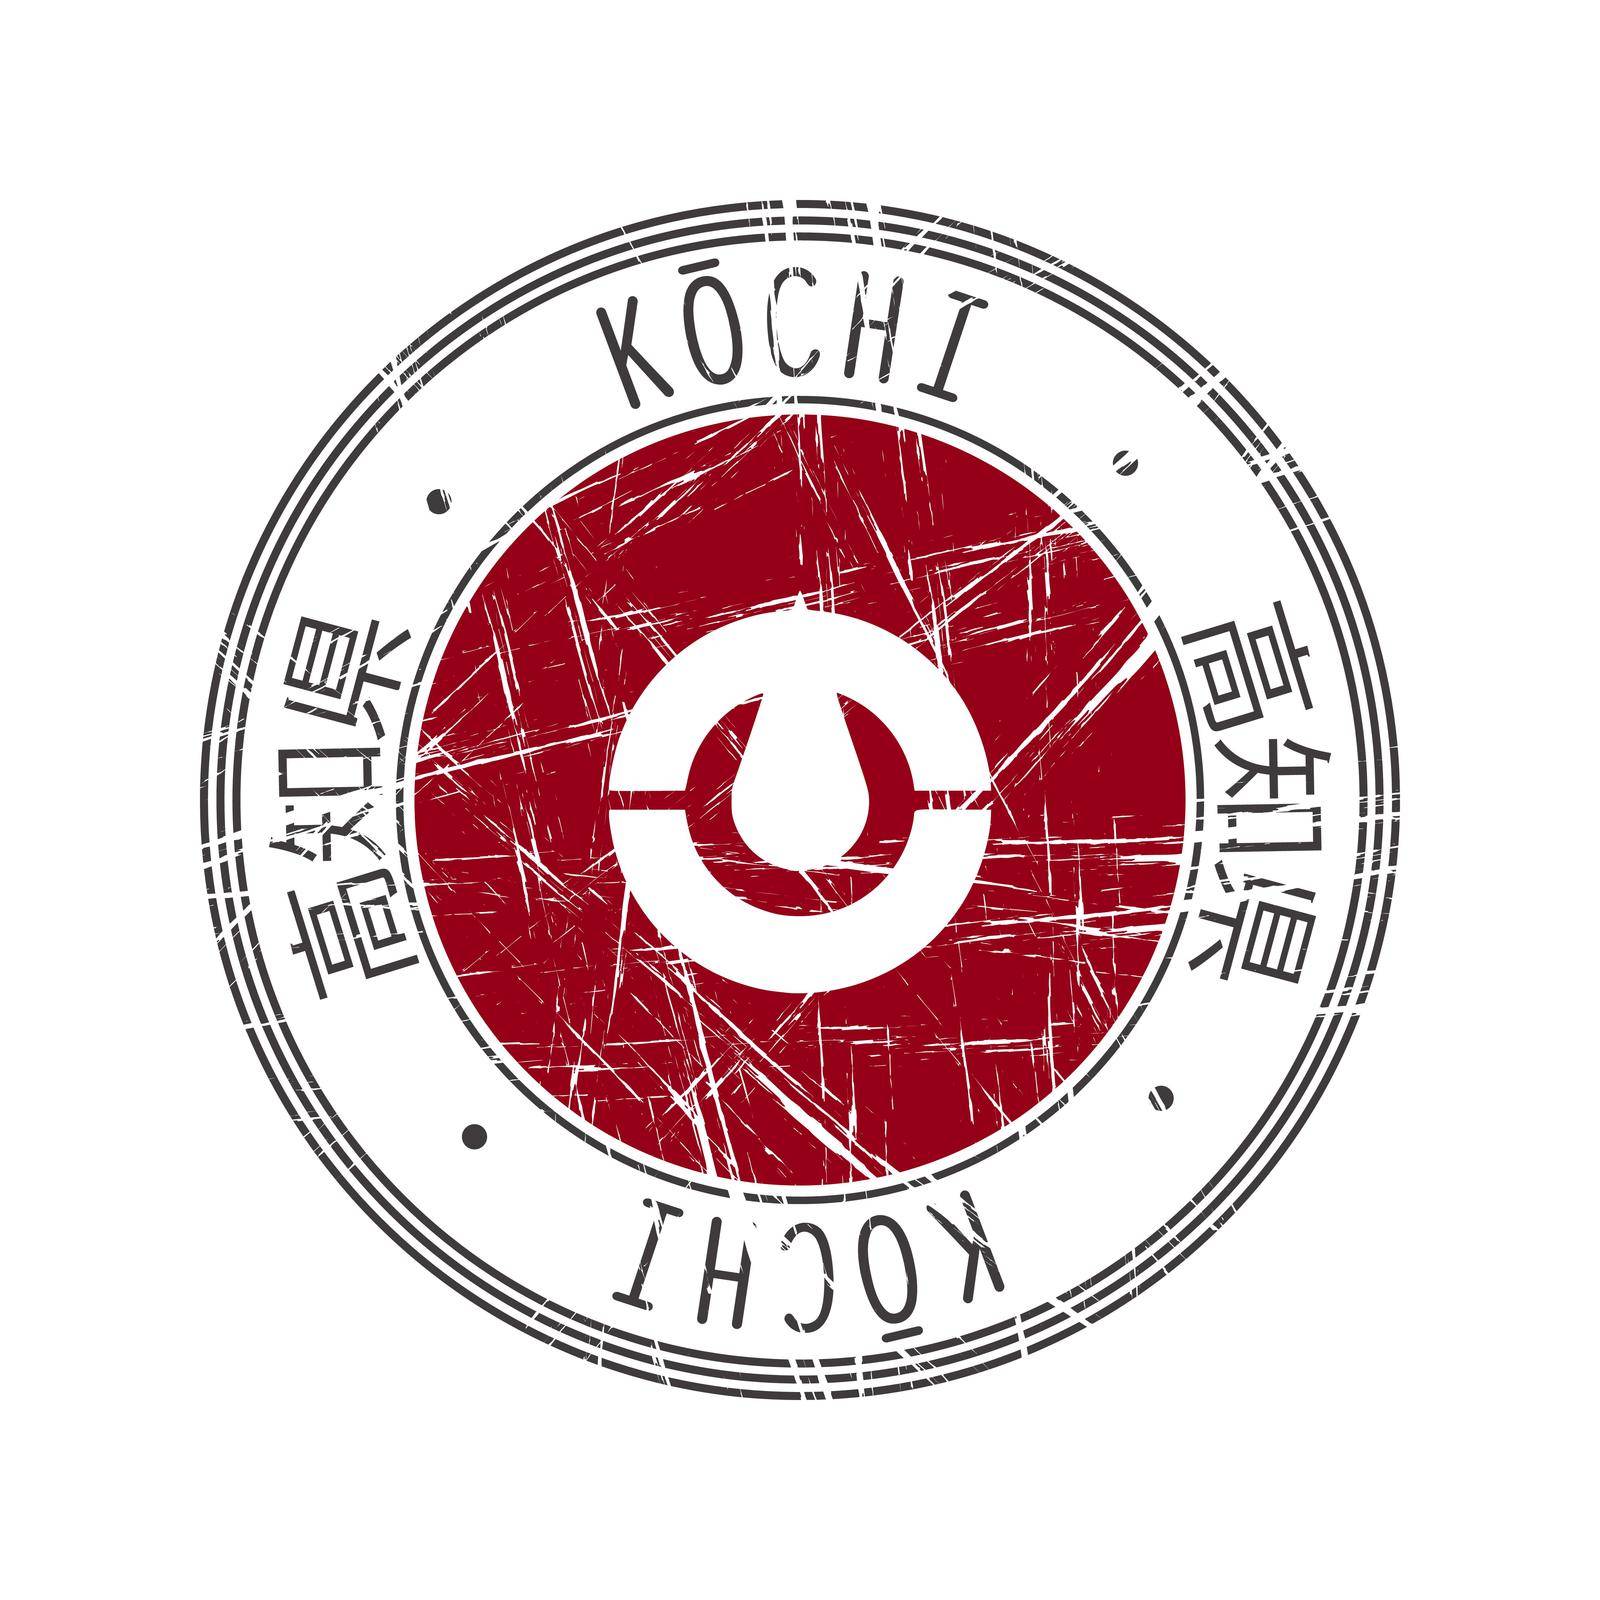 Kochi Prefecture, Japan. Vector rubber stamp over white background